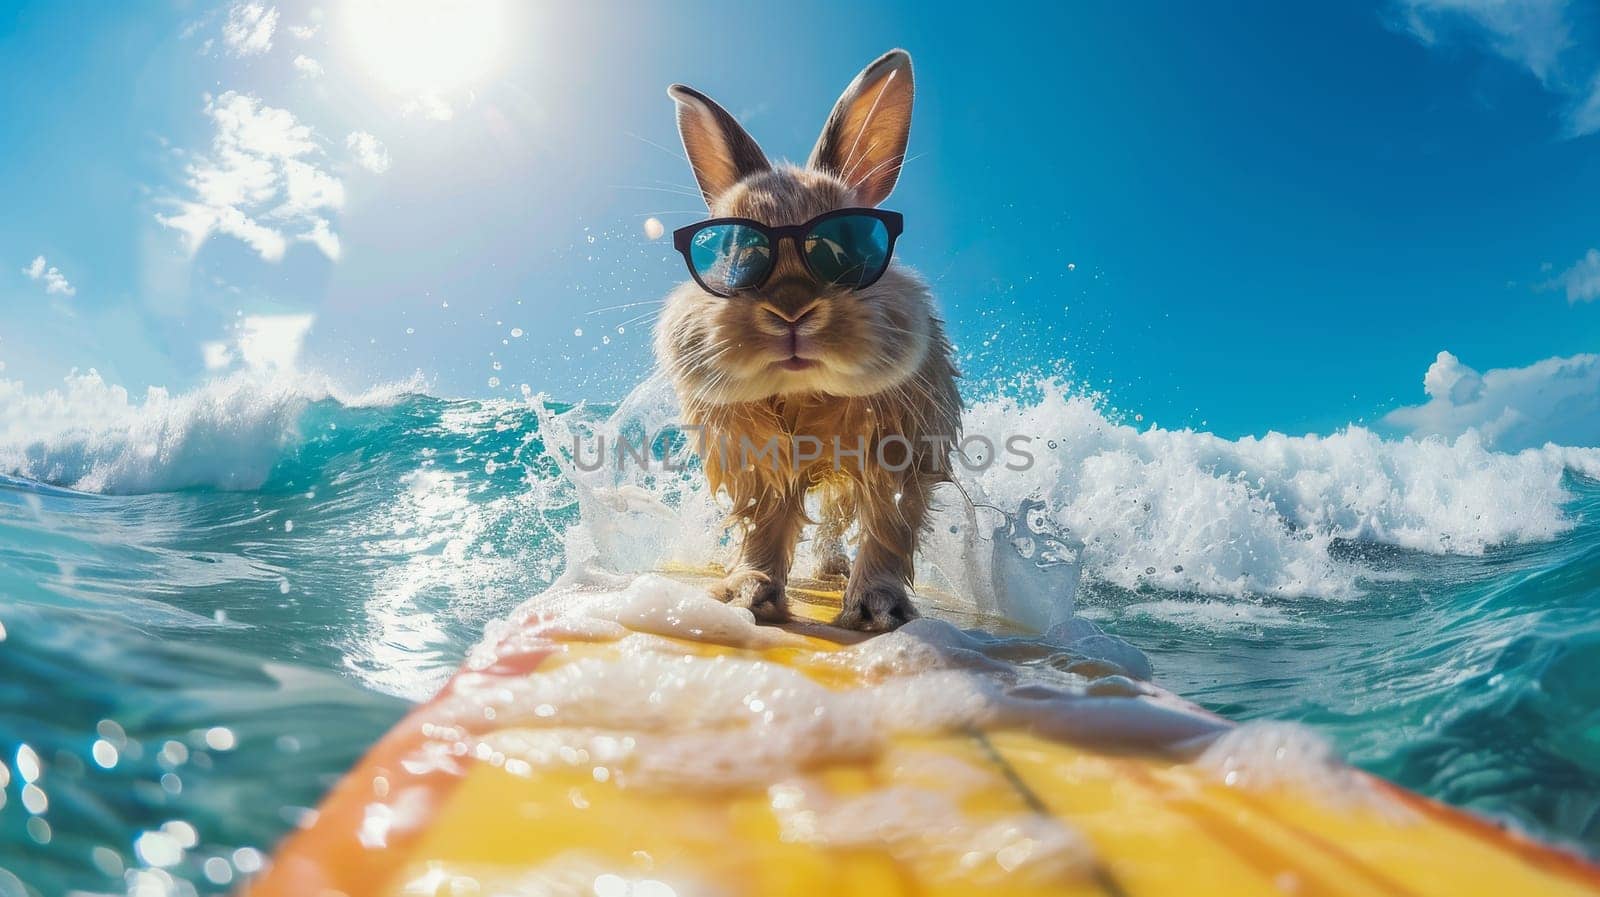 A rabbit is surfing on a yellow surfboard in the ocean. The rabbit is wearing sunglasses and he is enjoying the water